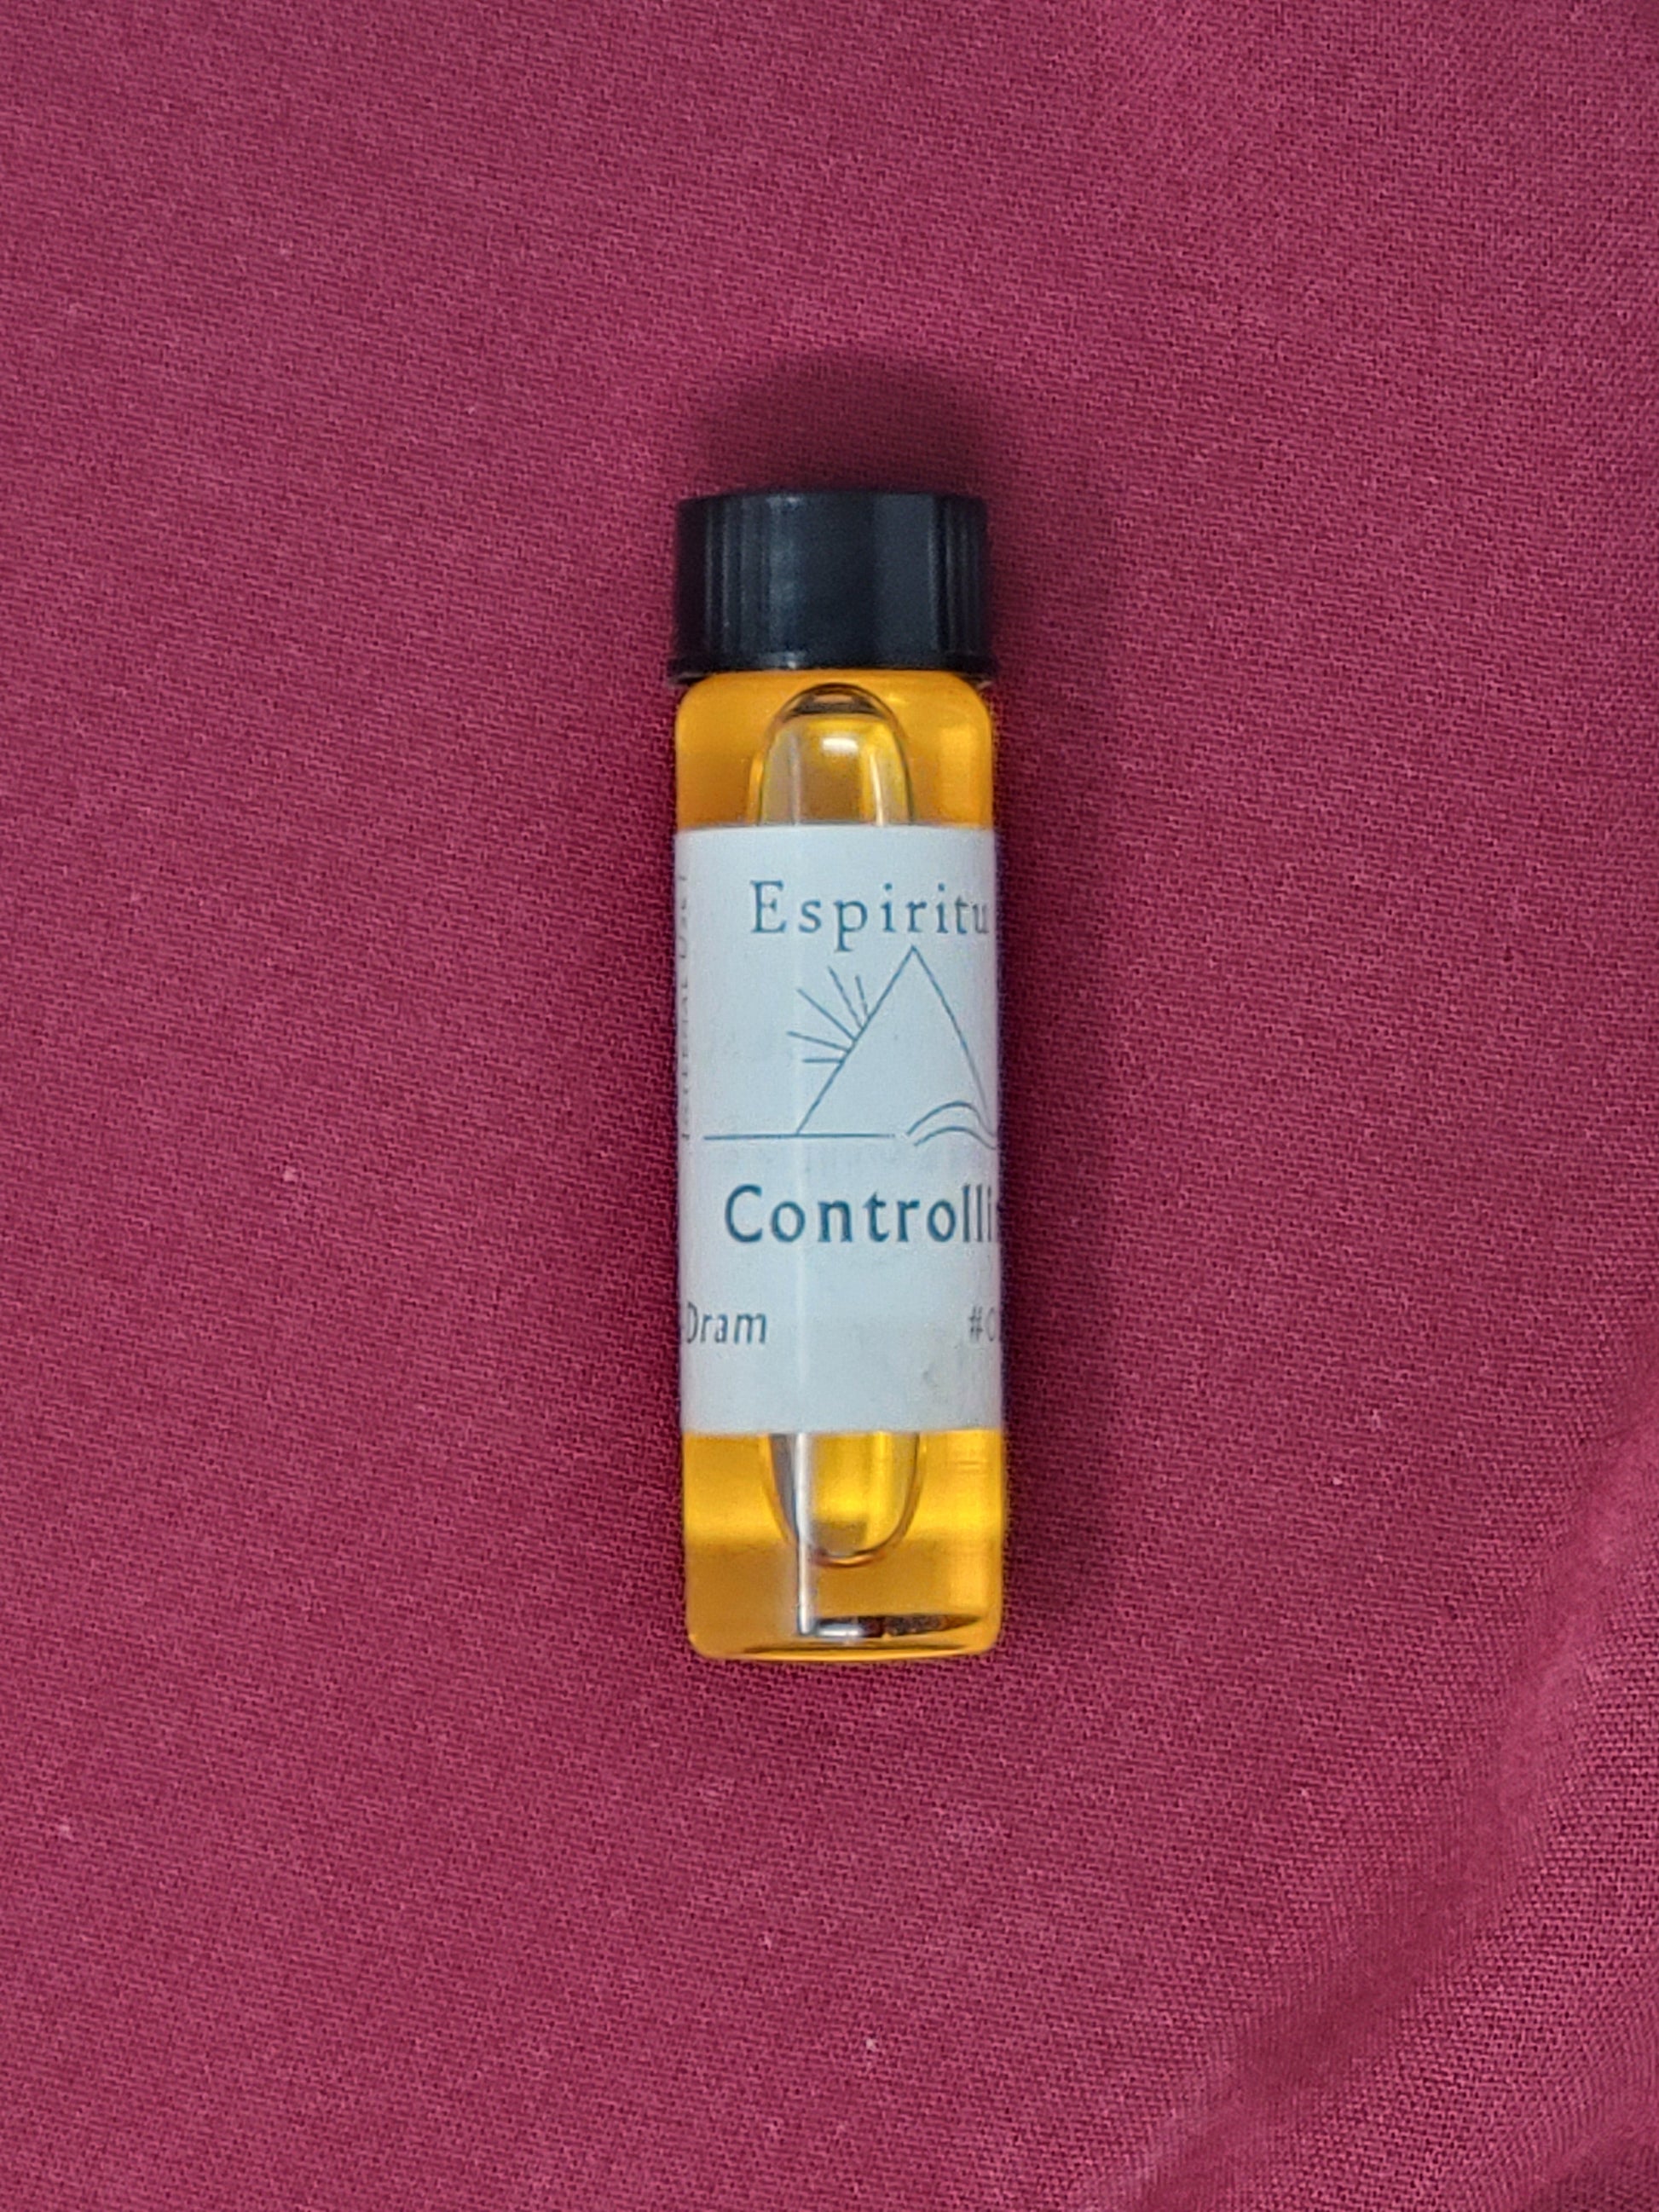 Controlling Spell Oil